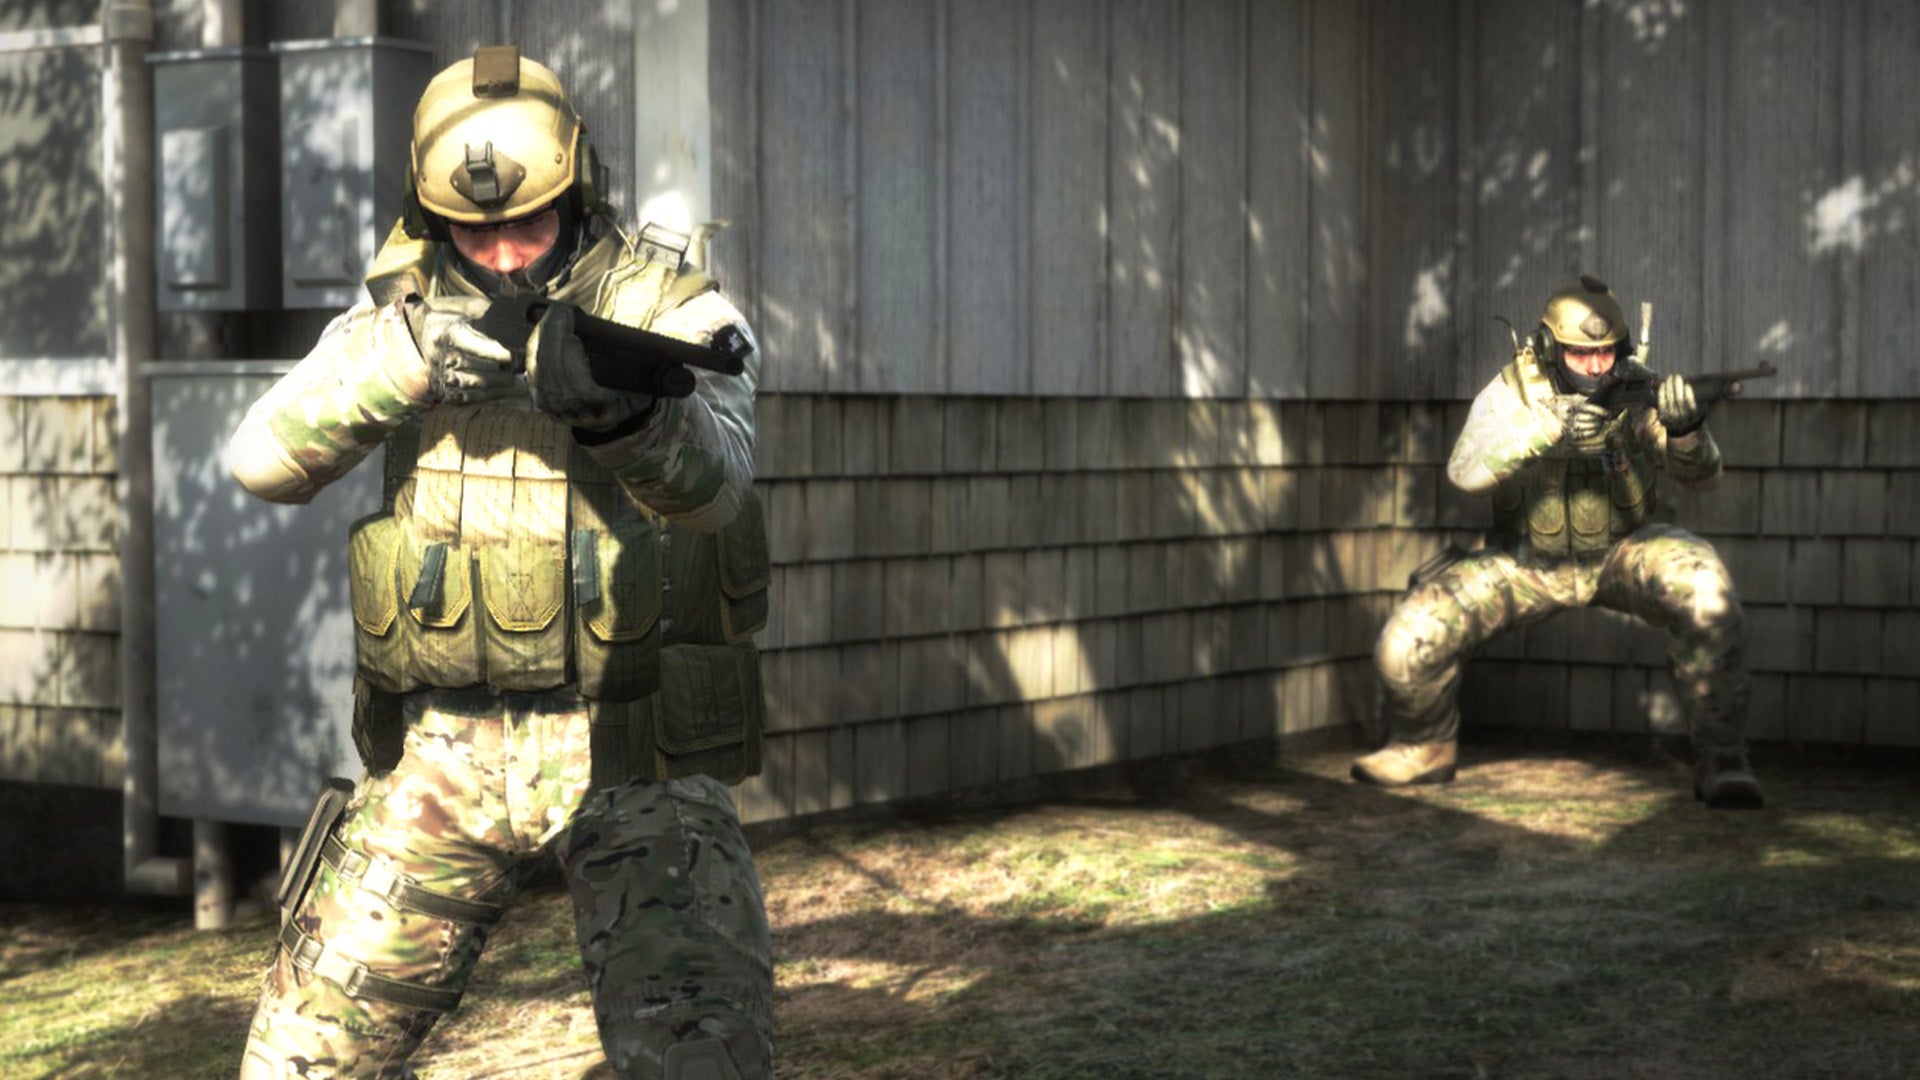 Image for CS:GO hits a new all-time concurrent player count following Counter-Strike 2 reveal